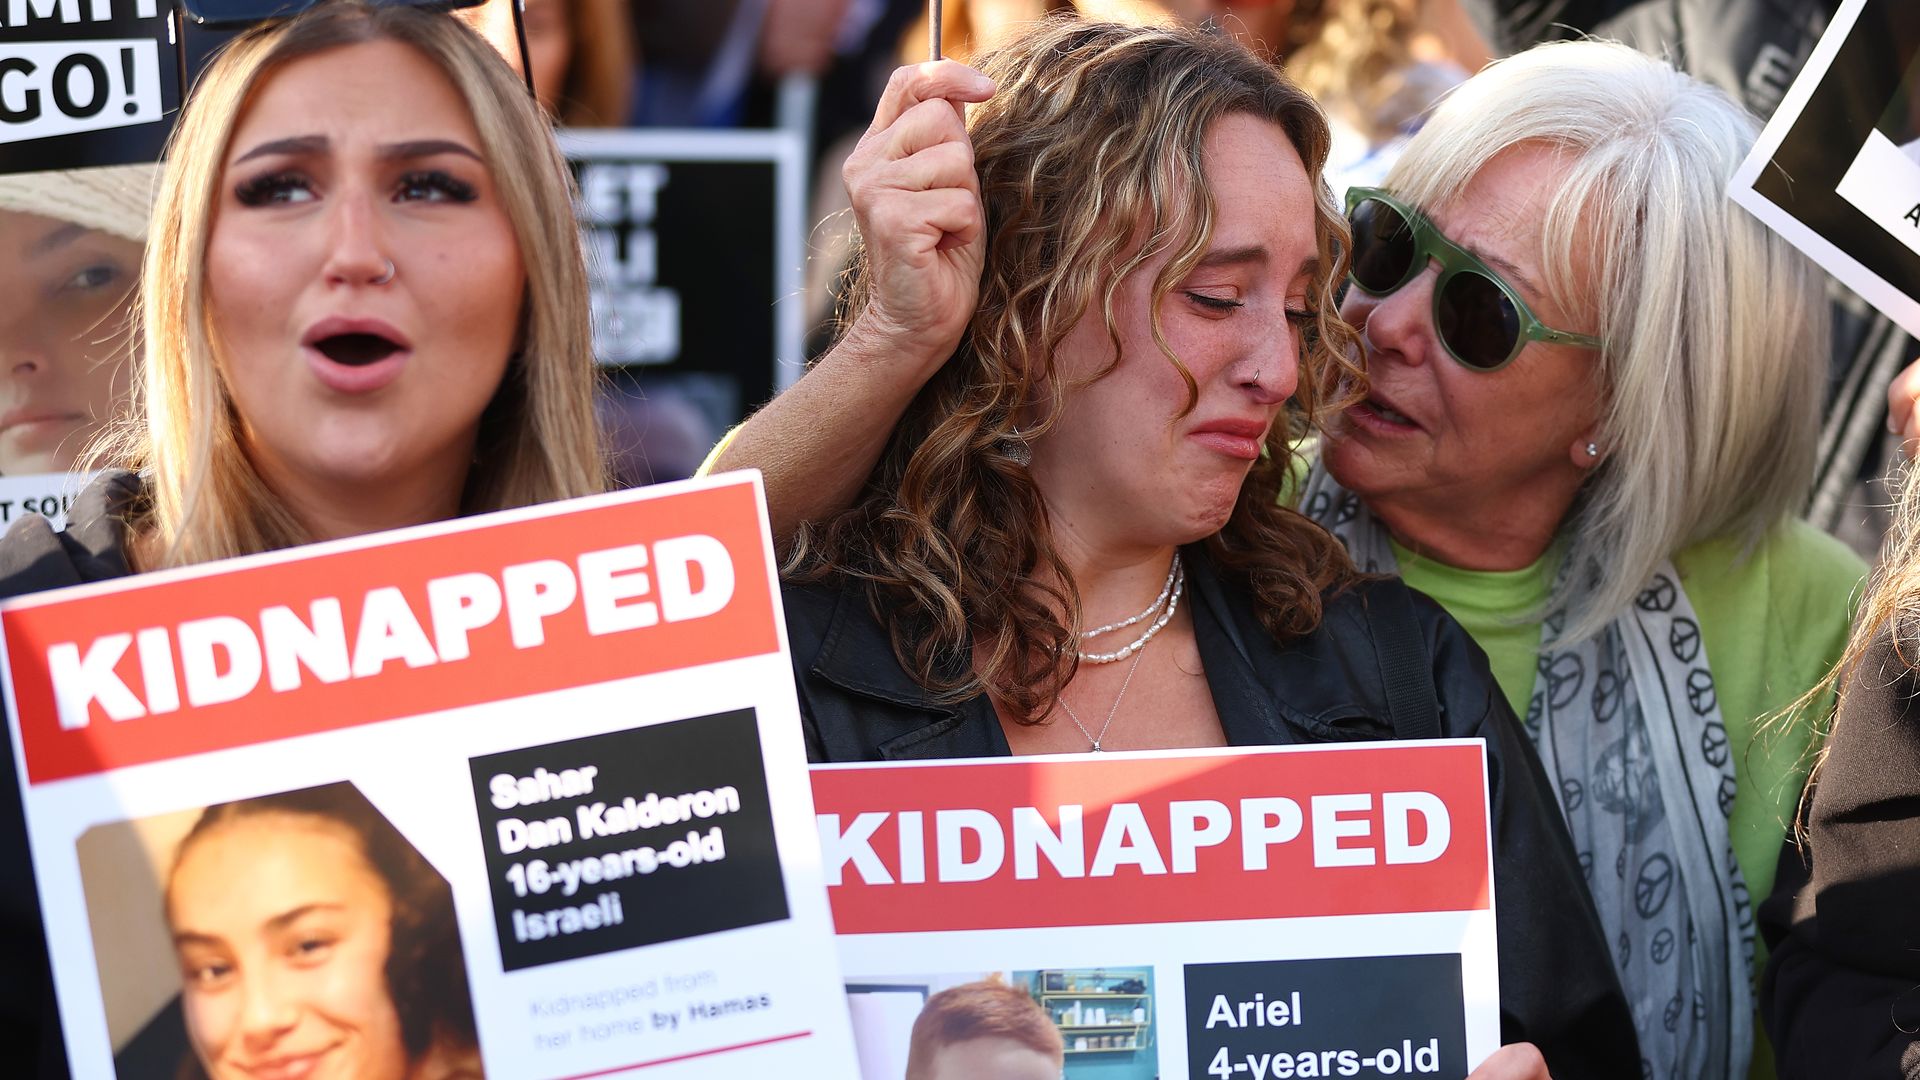 Protesters in London call for the release of hostages in Gaza on Monday, holding up signs that say "Kidnapped."